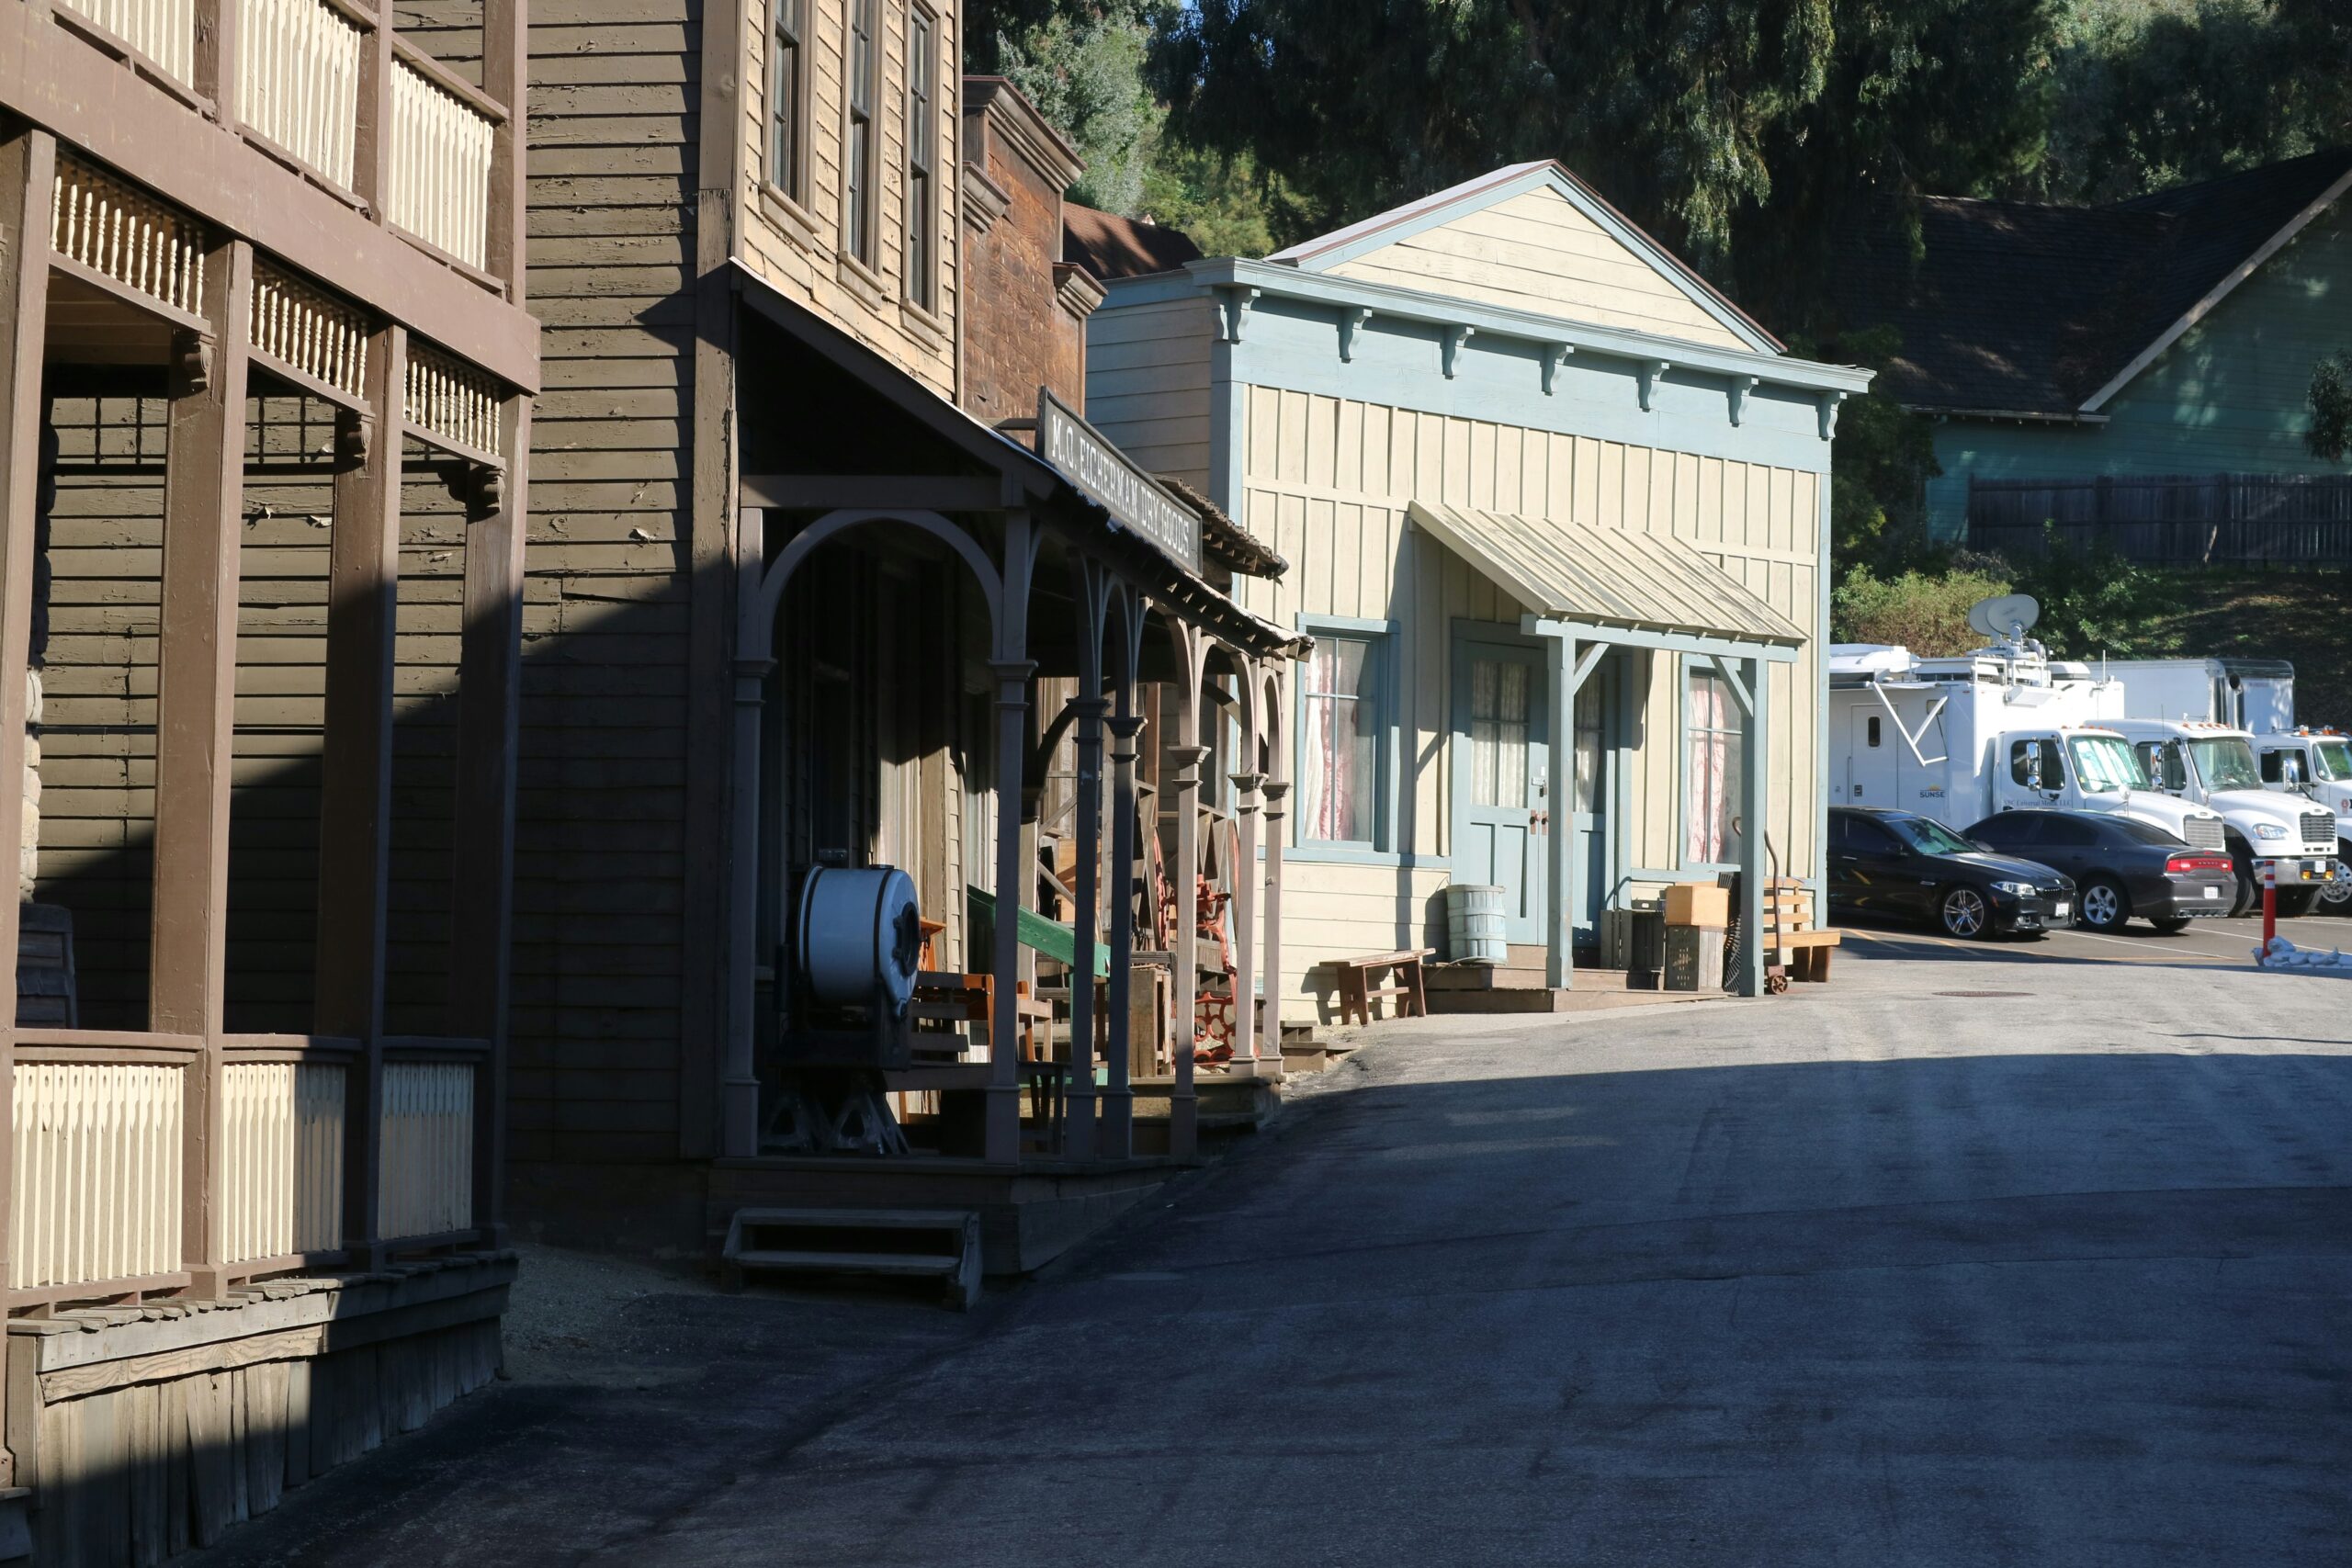 Universal Studios is one of the filming locations of the film “High Plains Drifter”.
Pictured: a old western set in Universal Studios in Hollywood